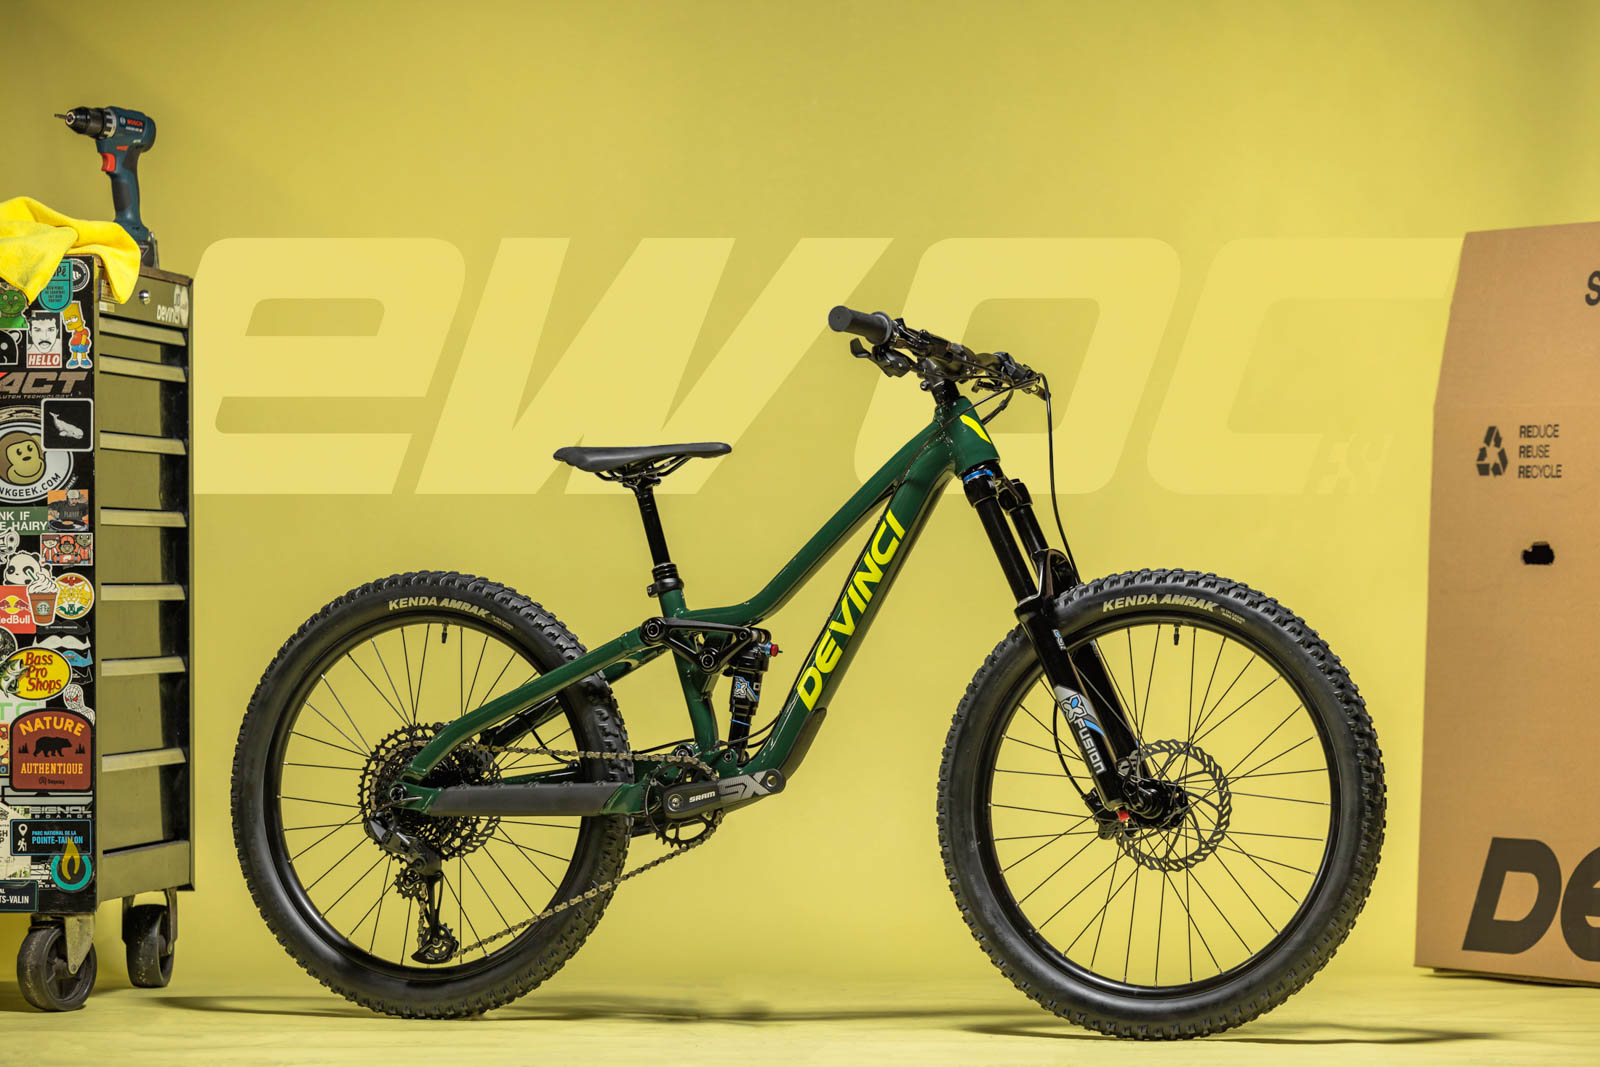 Devinci Goes For The Groms With The Ewoc FS 24” (or 26”) Trail Bike